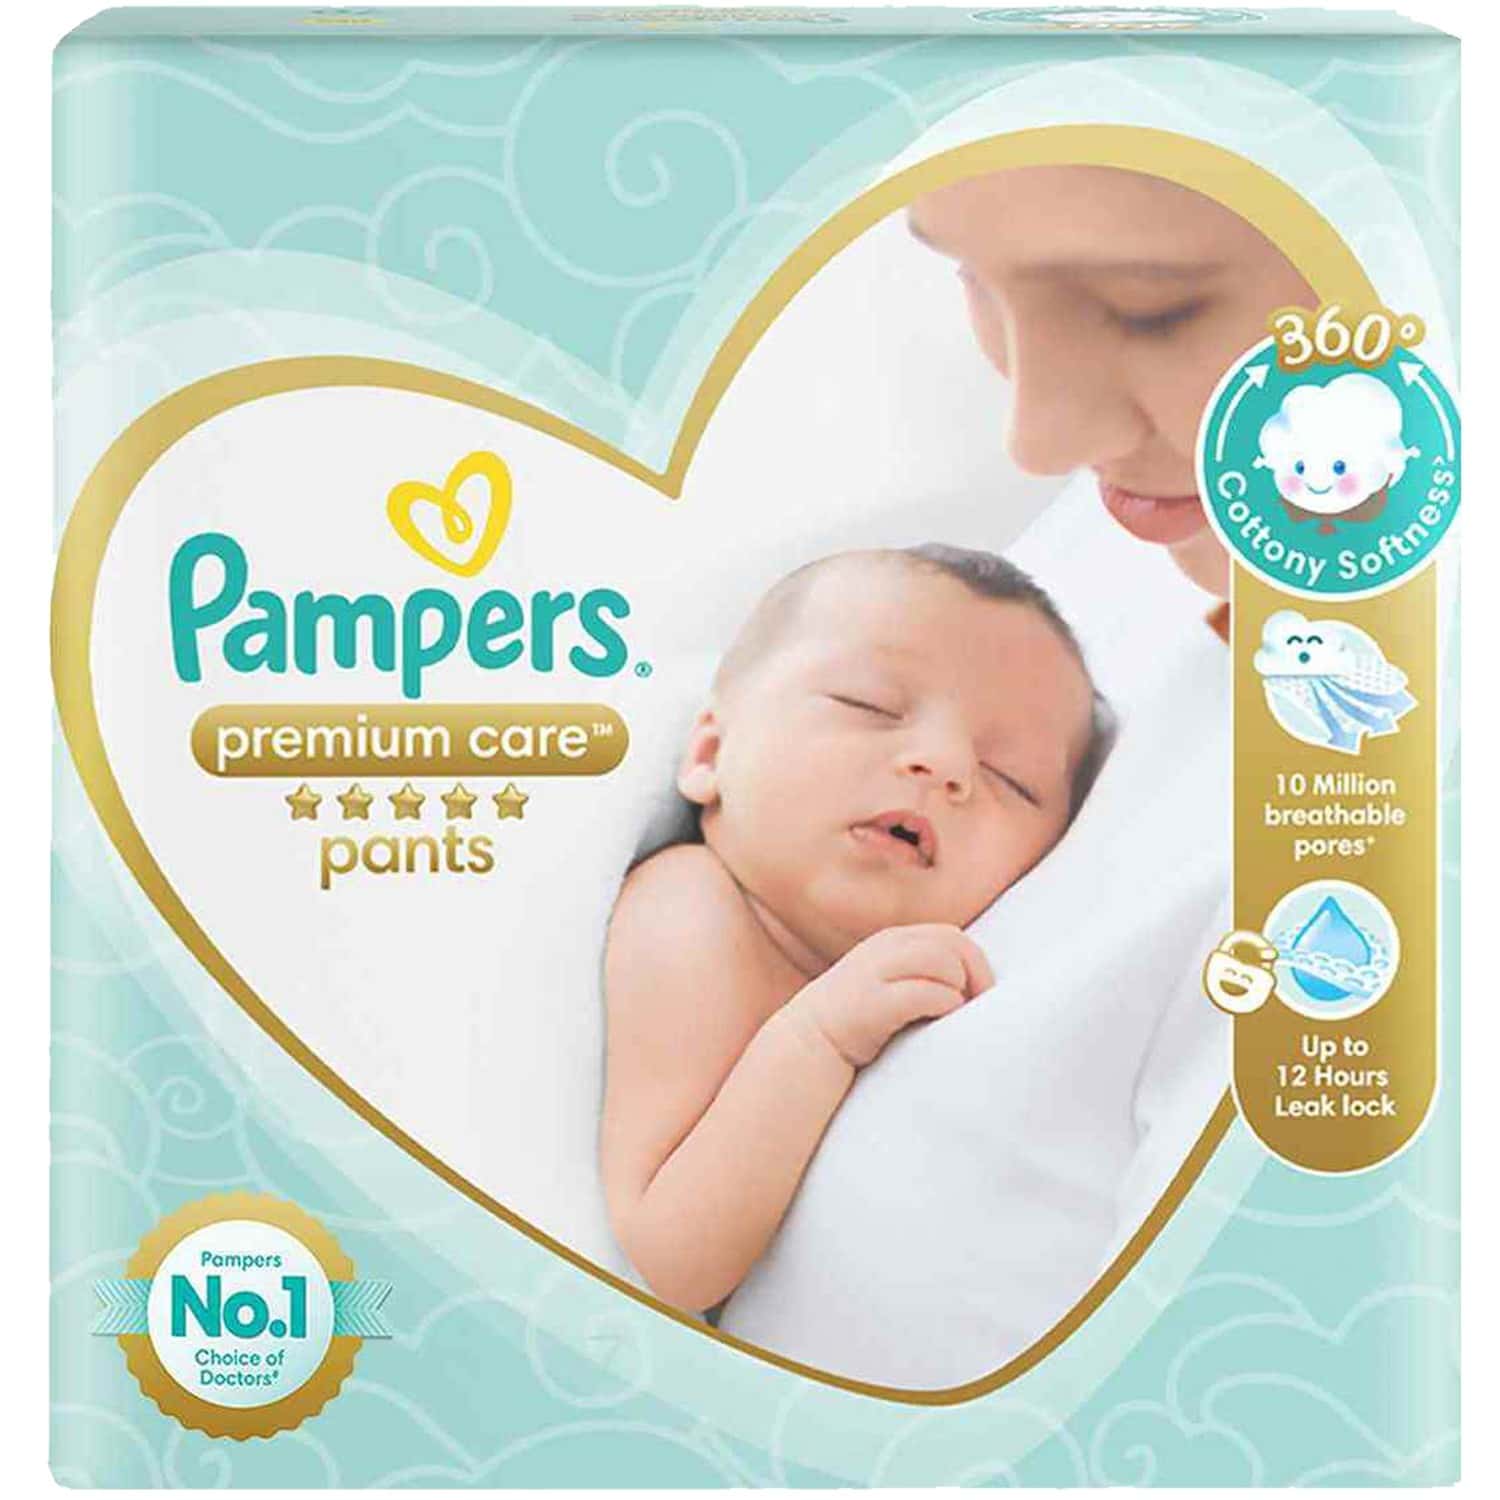 Pampers Premium Care Pants For Baby, M (16Pants) - Town Tokri